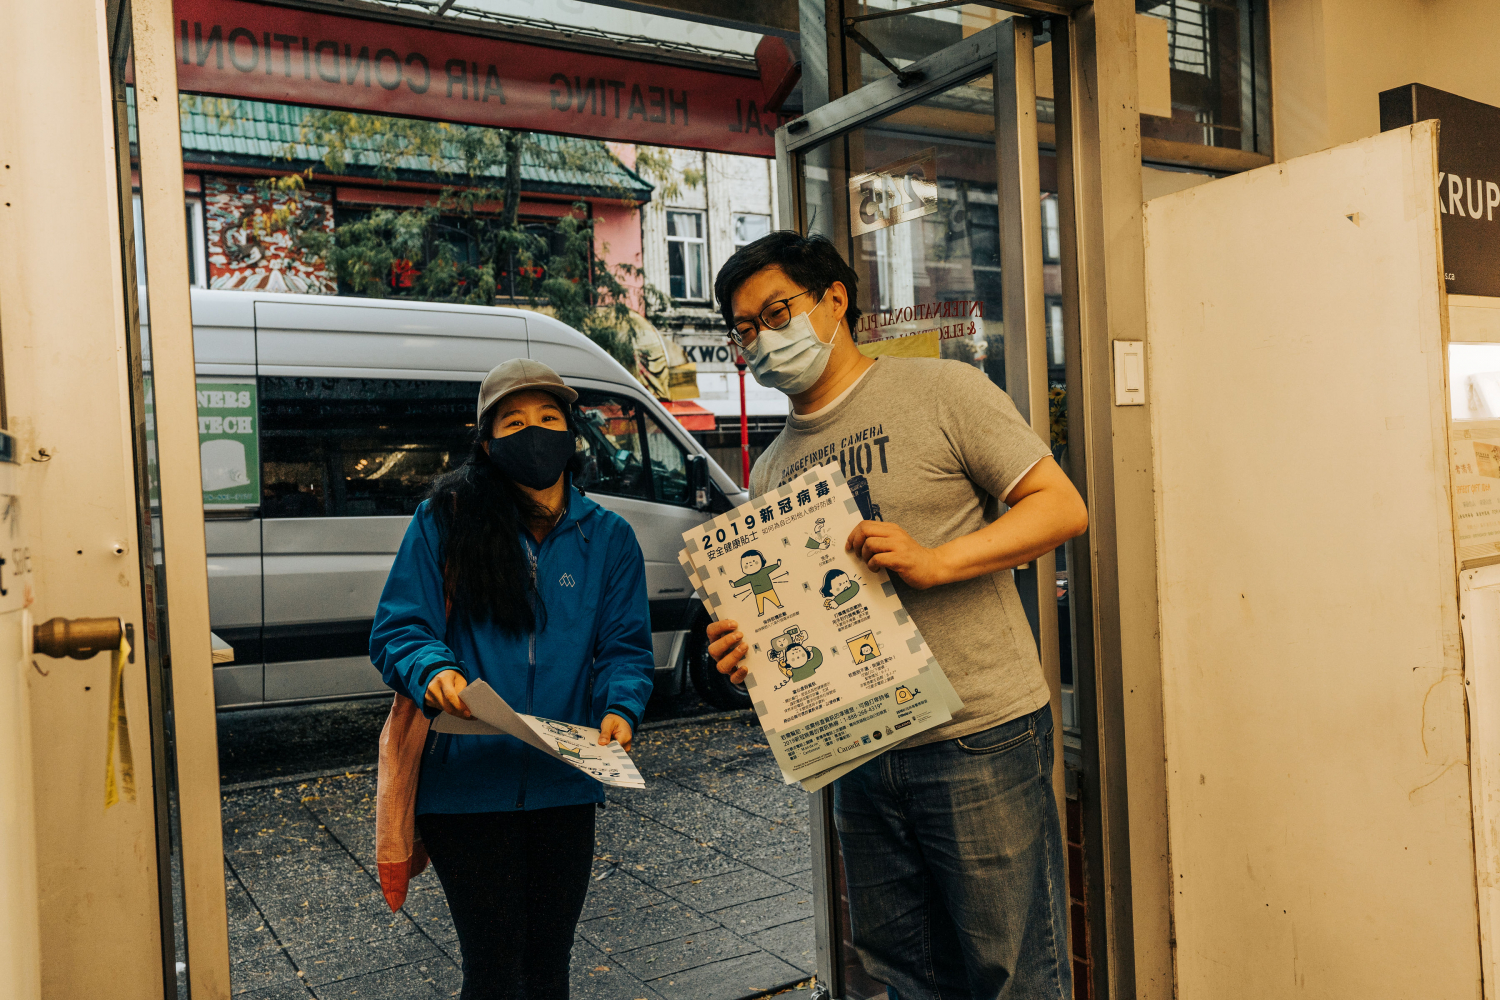 A smiling masked Asian man and woman, standing in a store doorway, holding posters